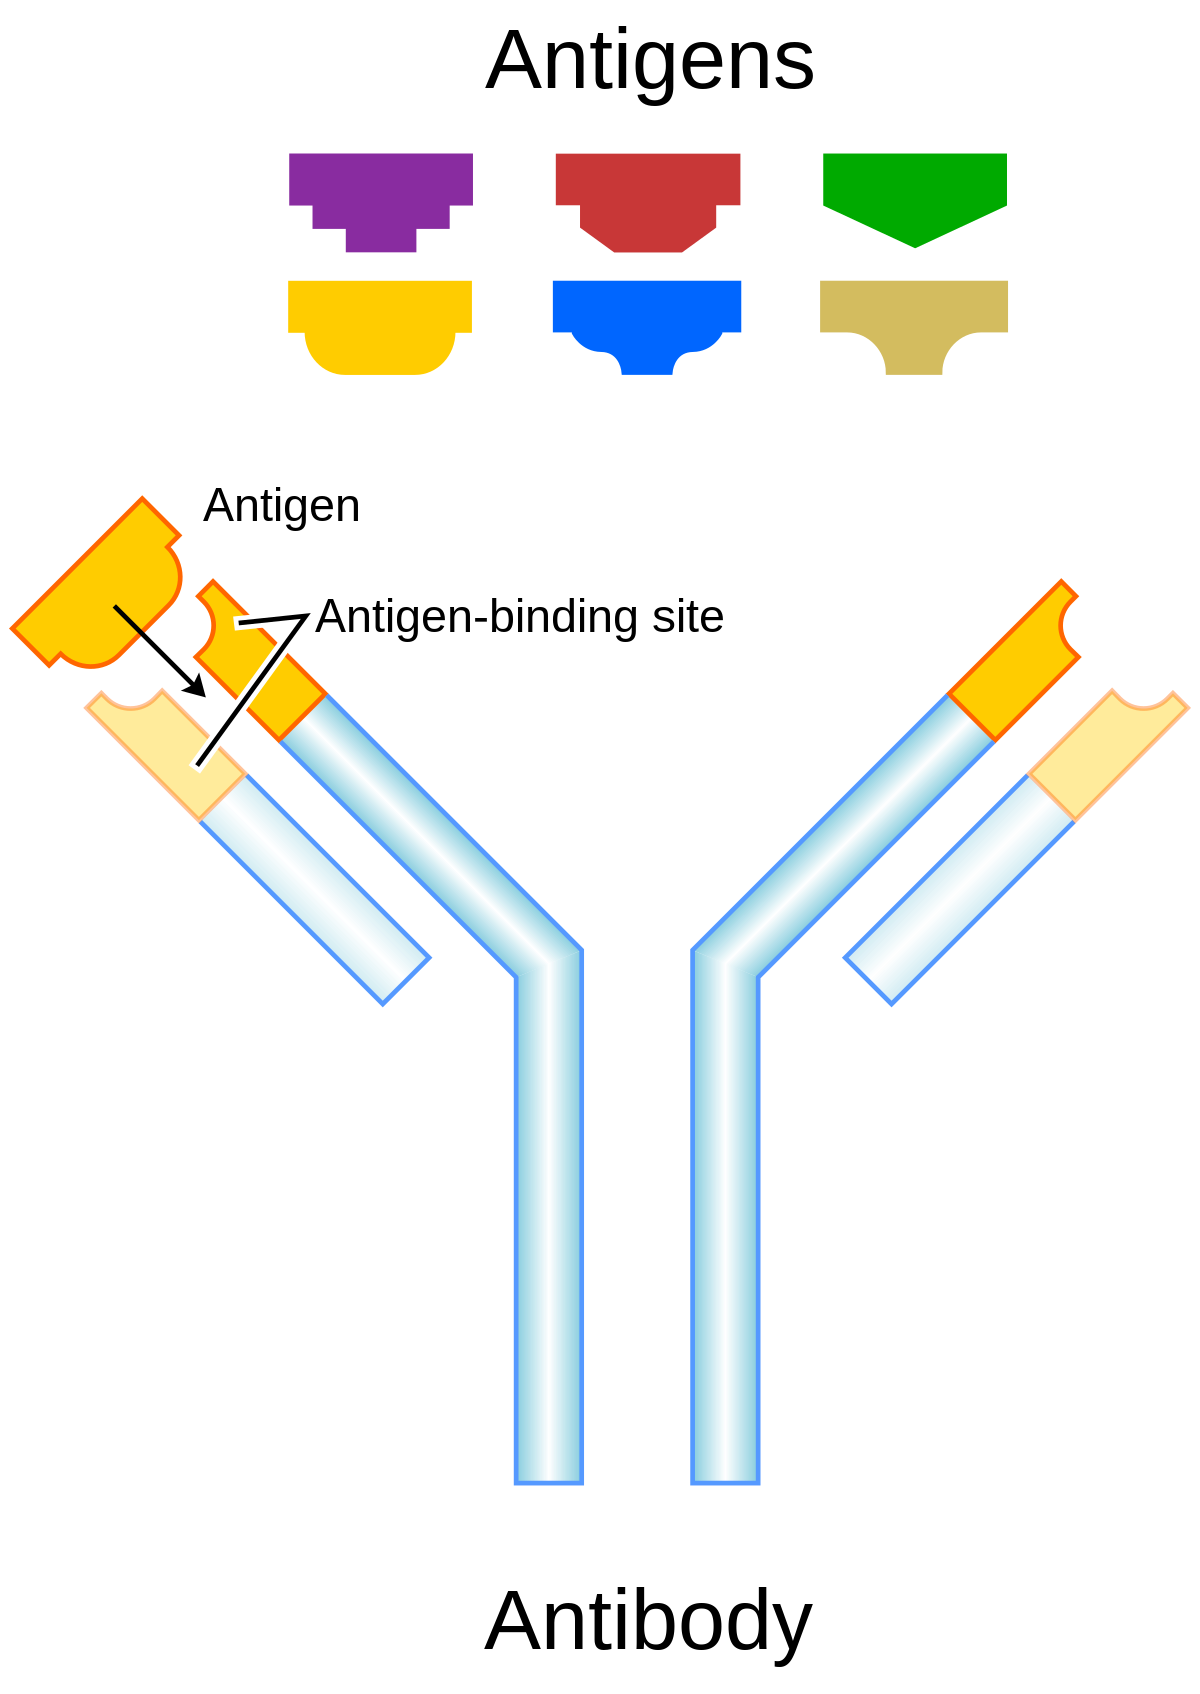 This image illustrates the structure of an antigen and its interaction with an antibody